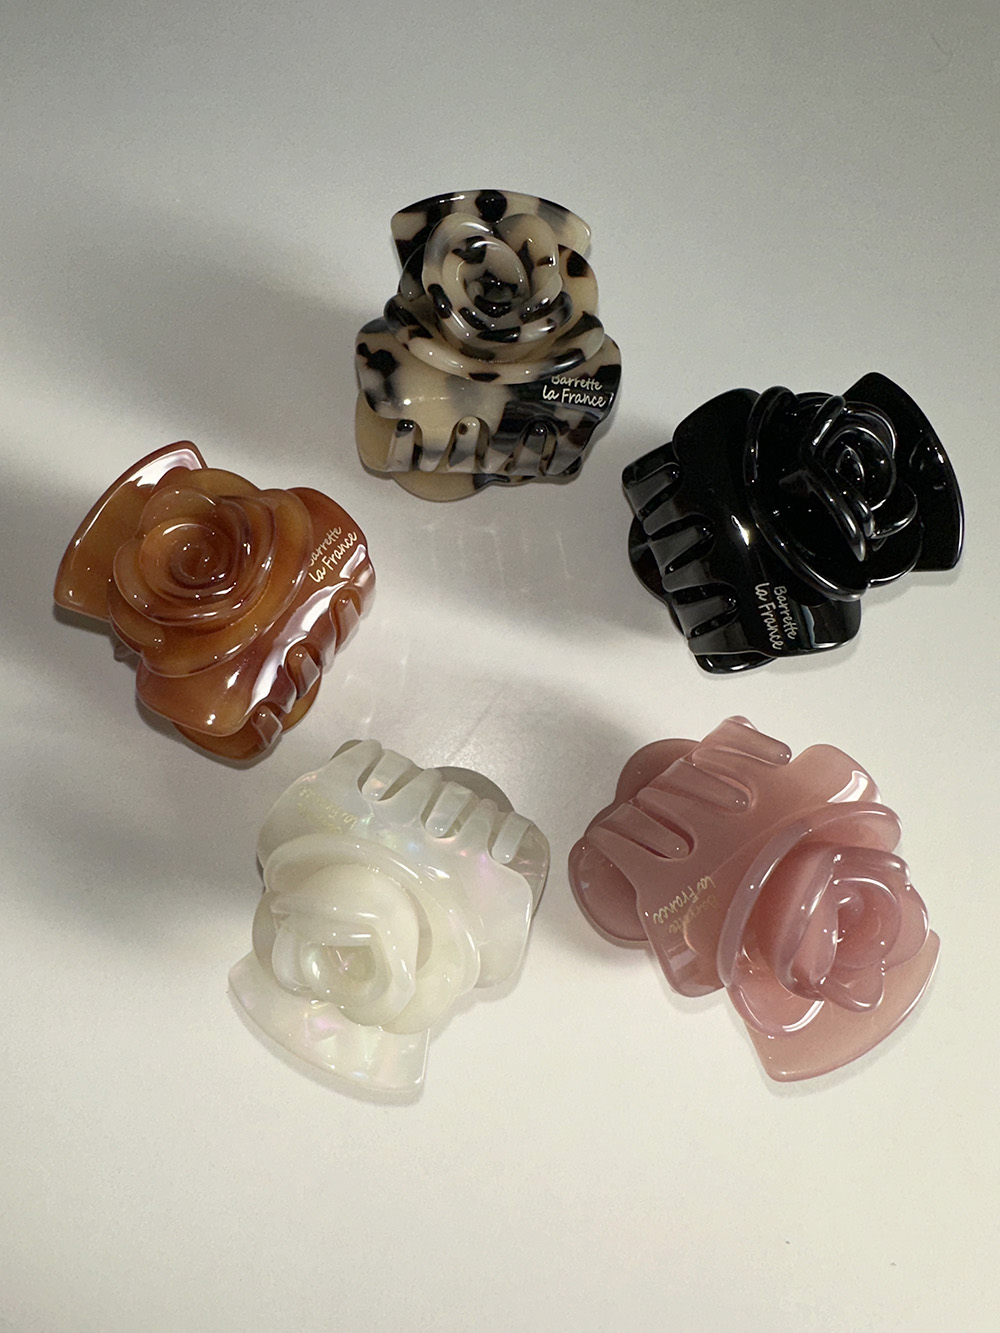 Double rose hair clip (5color)